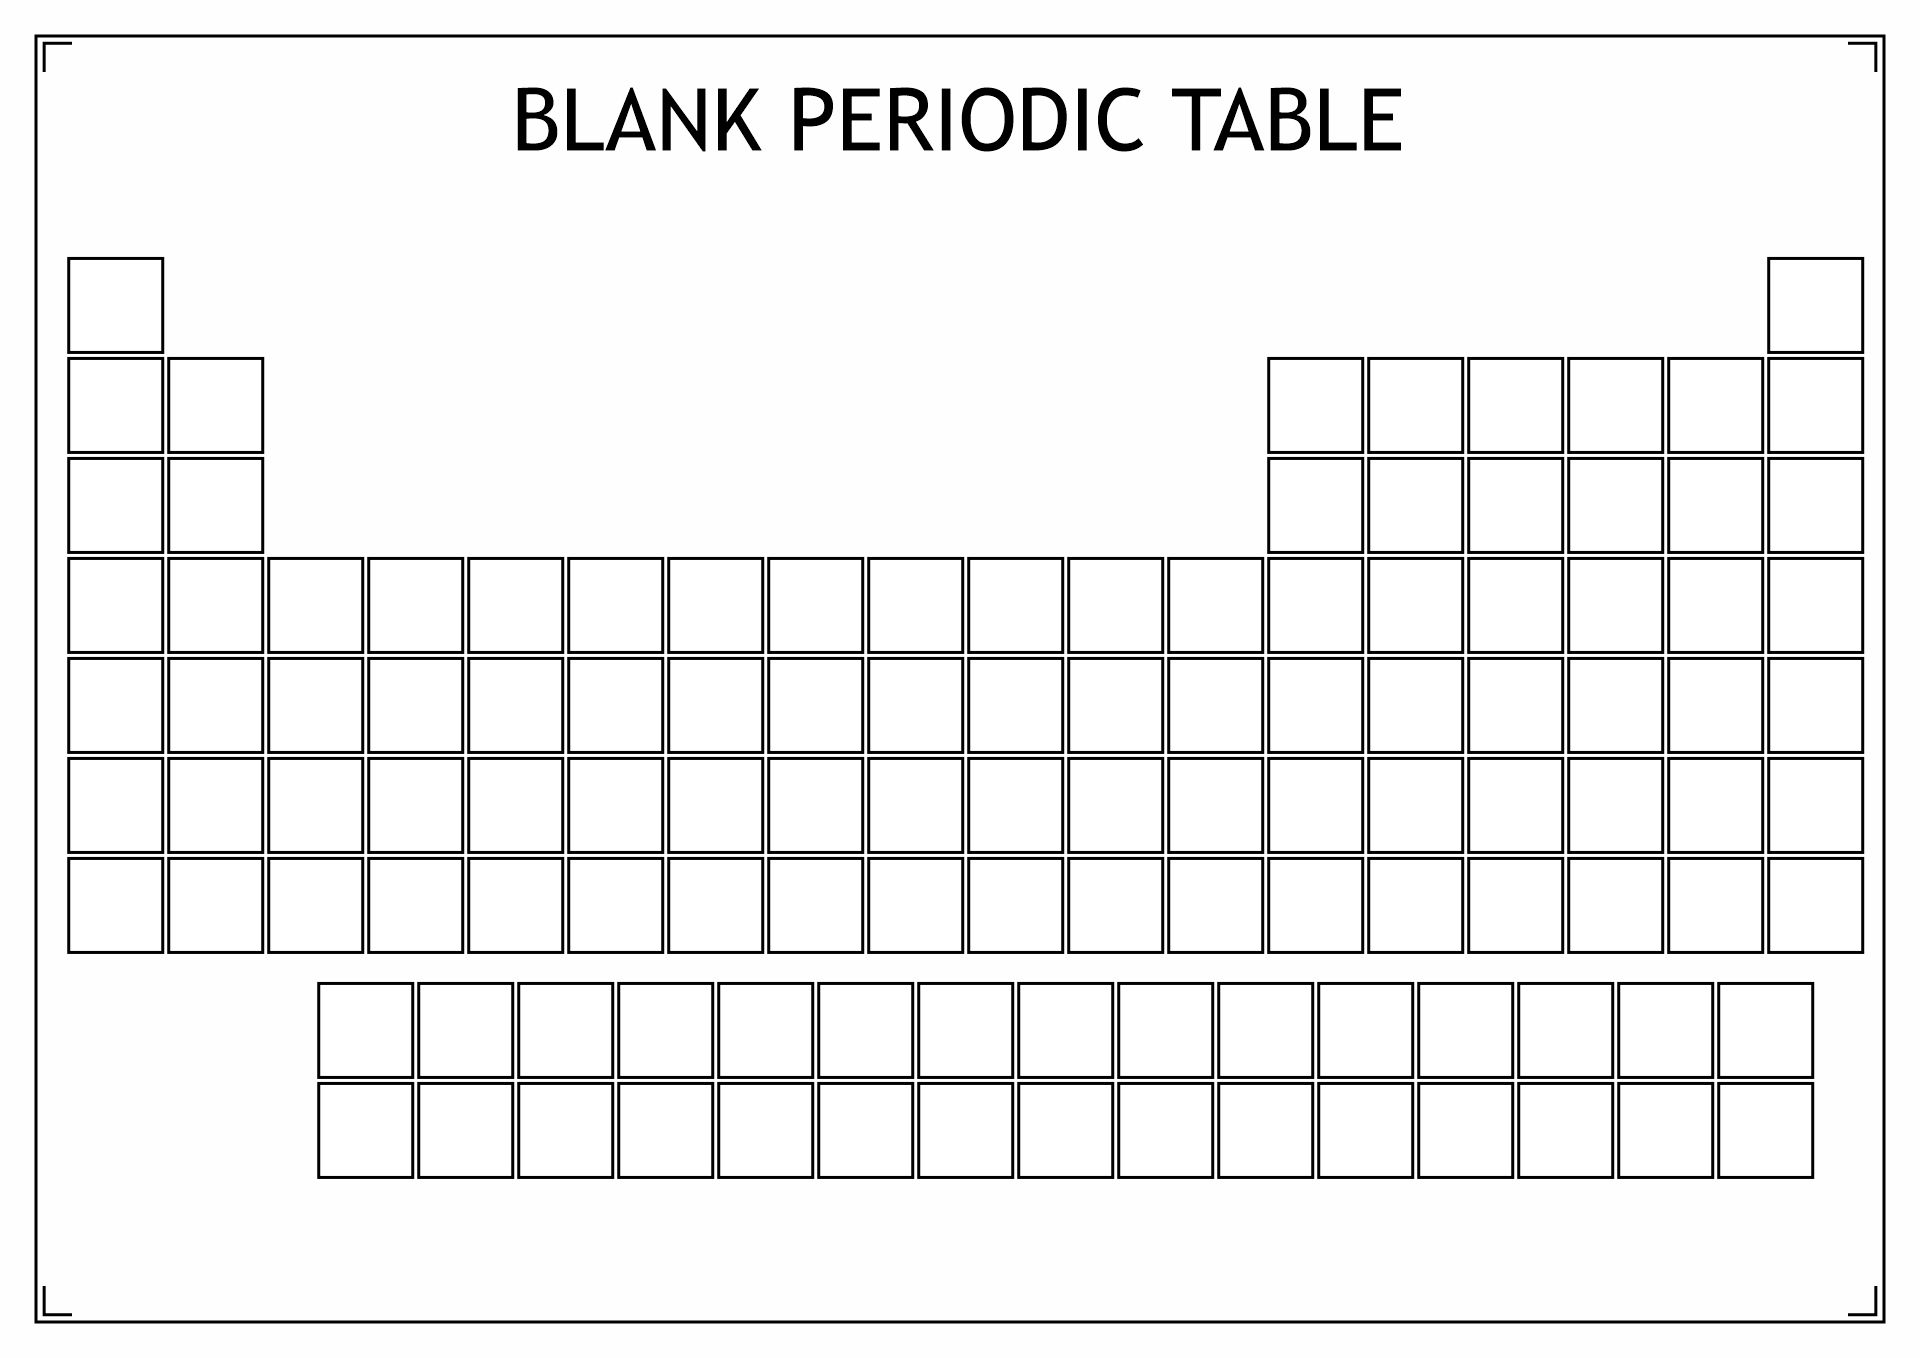 Blank Periodic Table Image